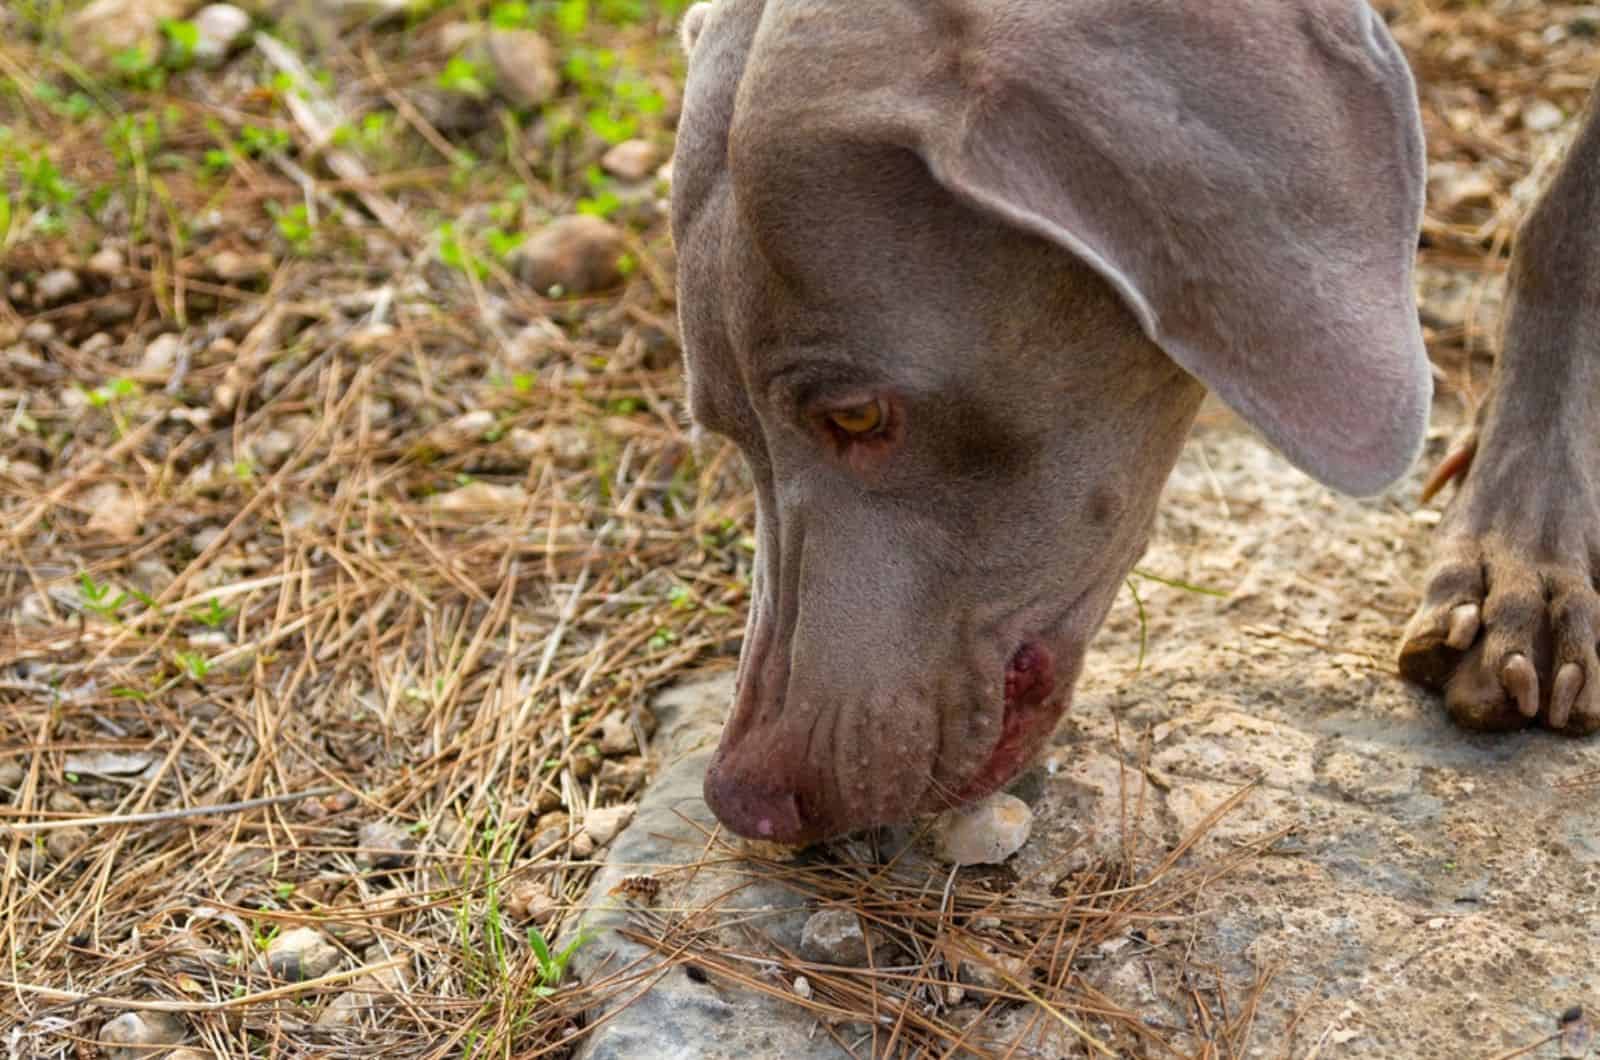 dog eating small rocks in the garden